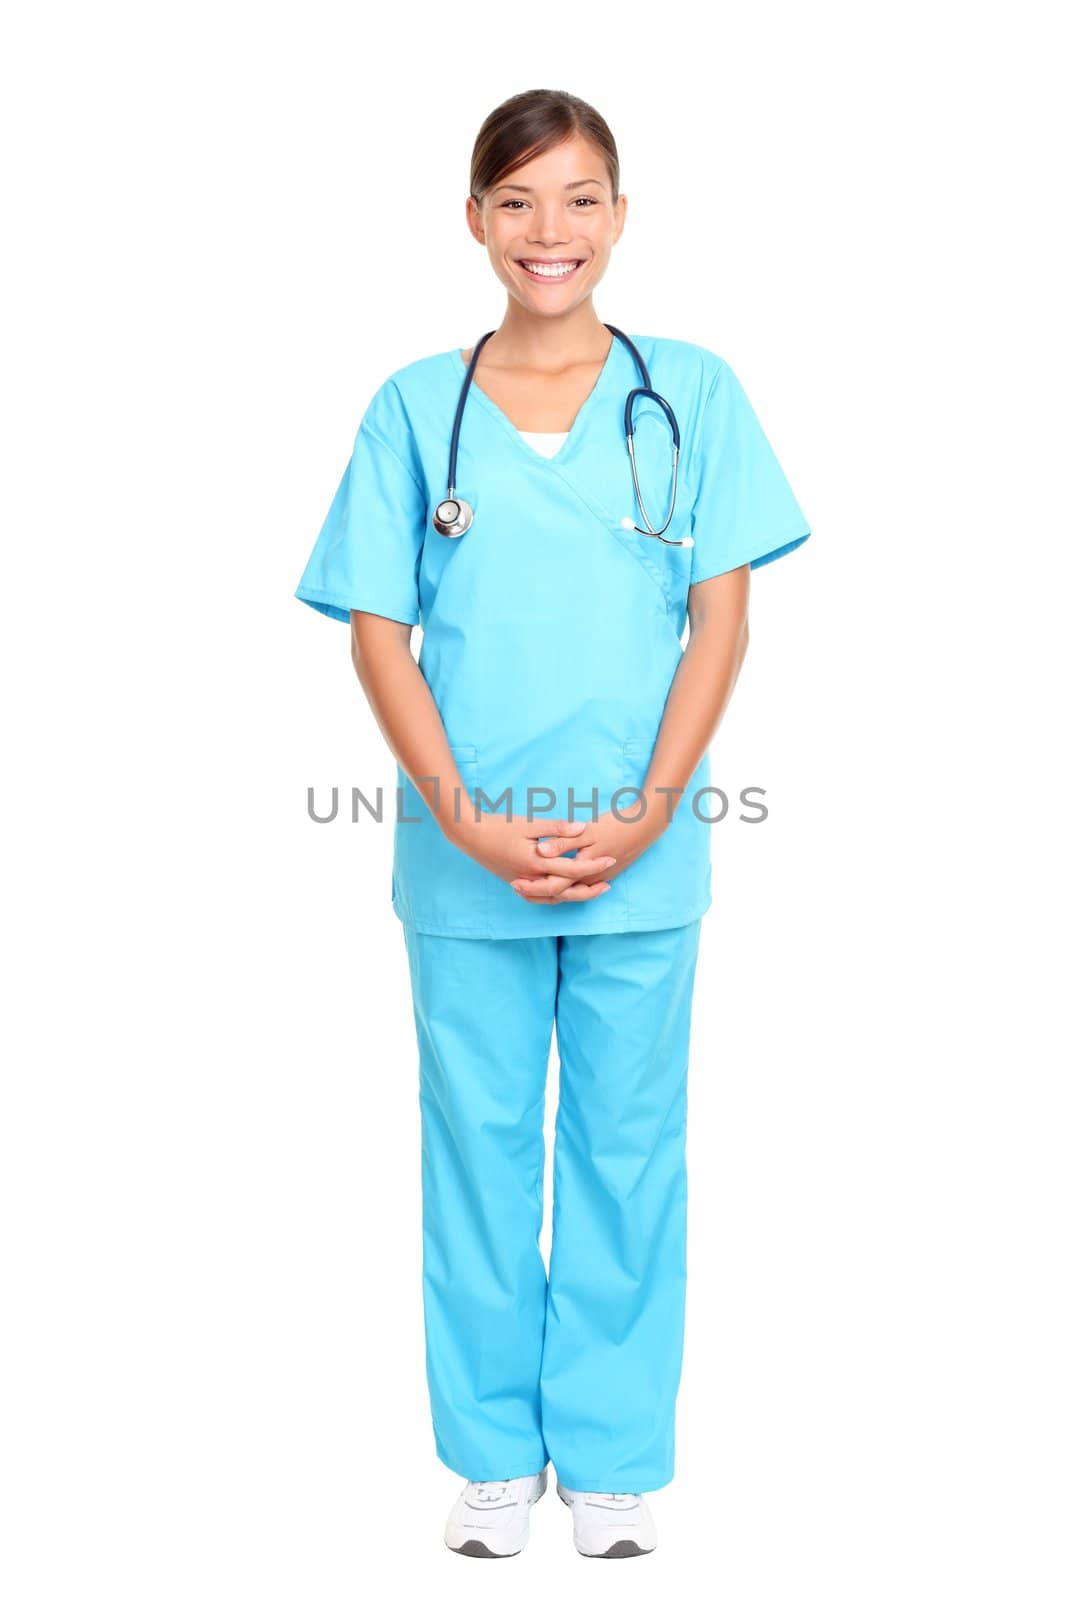 Nurse standing isolated over white background. Mixed-race Asian / Caucasian woman nurse or young medical doctor smiling in full length.